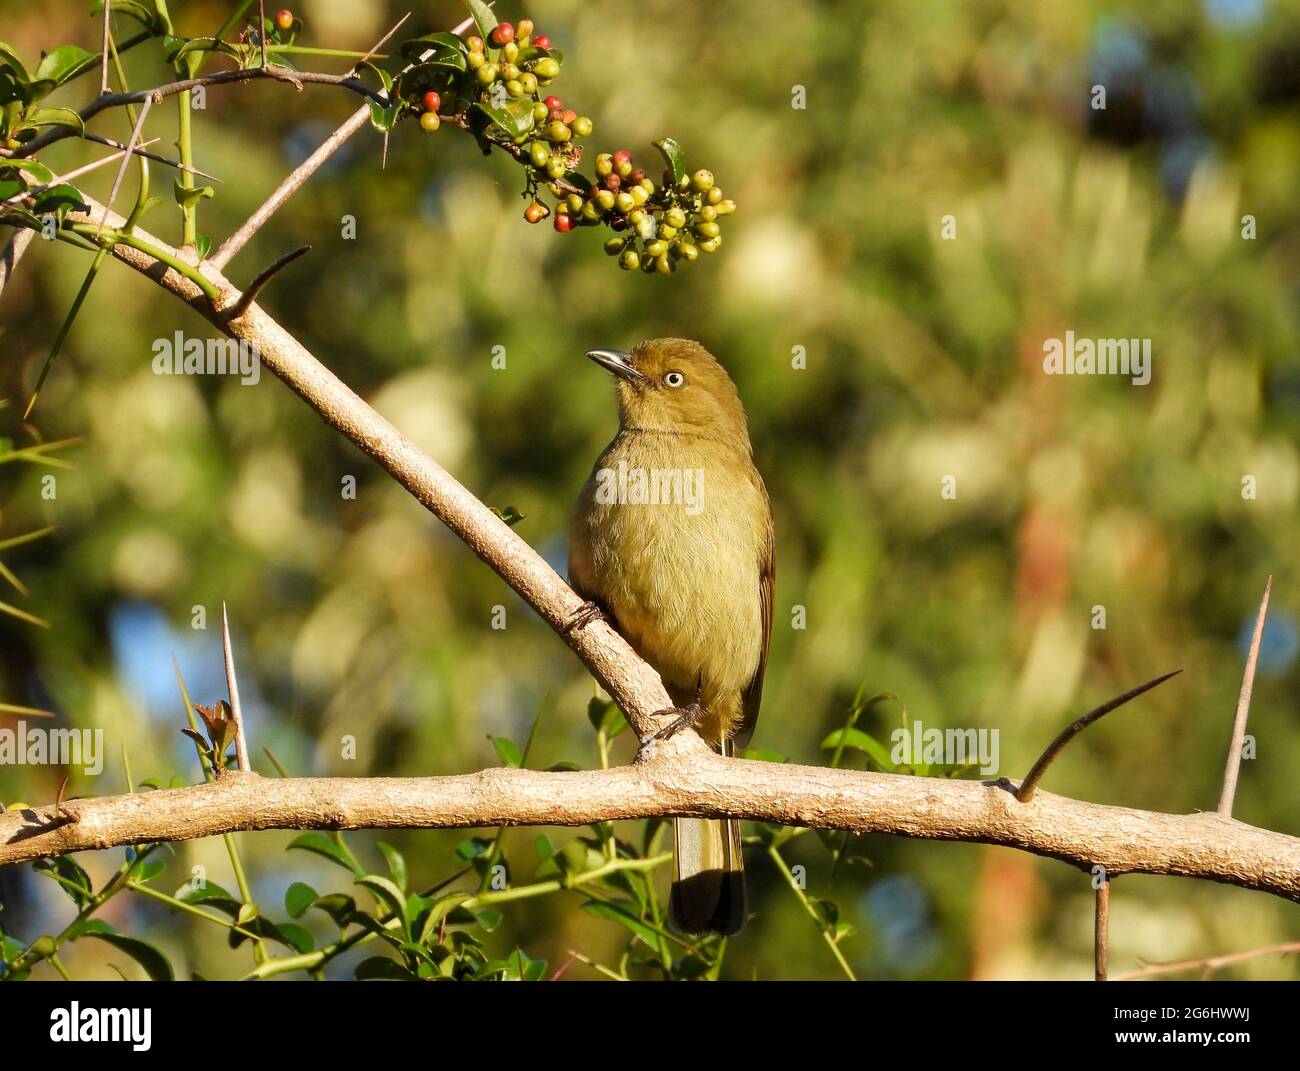 A sombre greenbul forages in a tree with berries Stock Photo